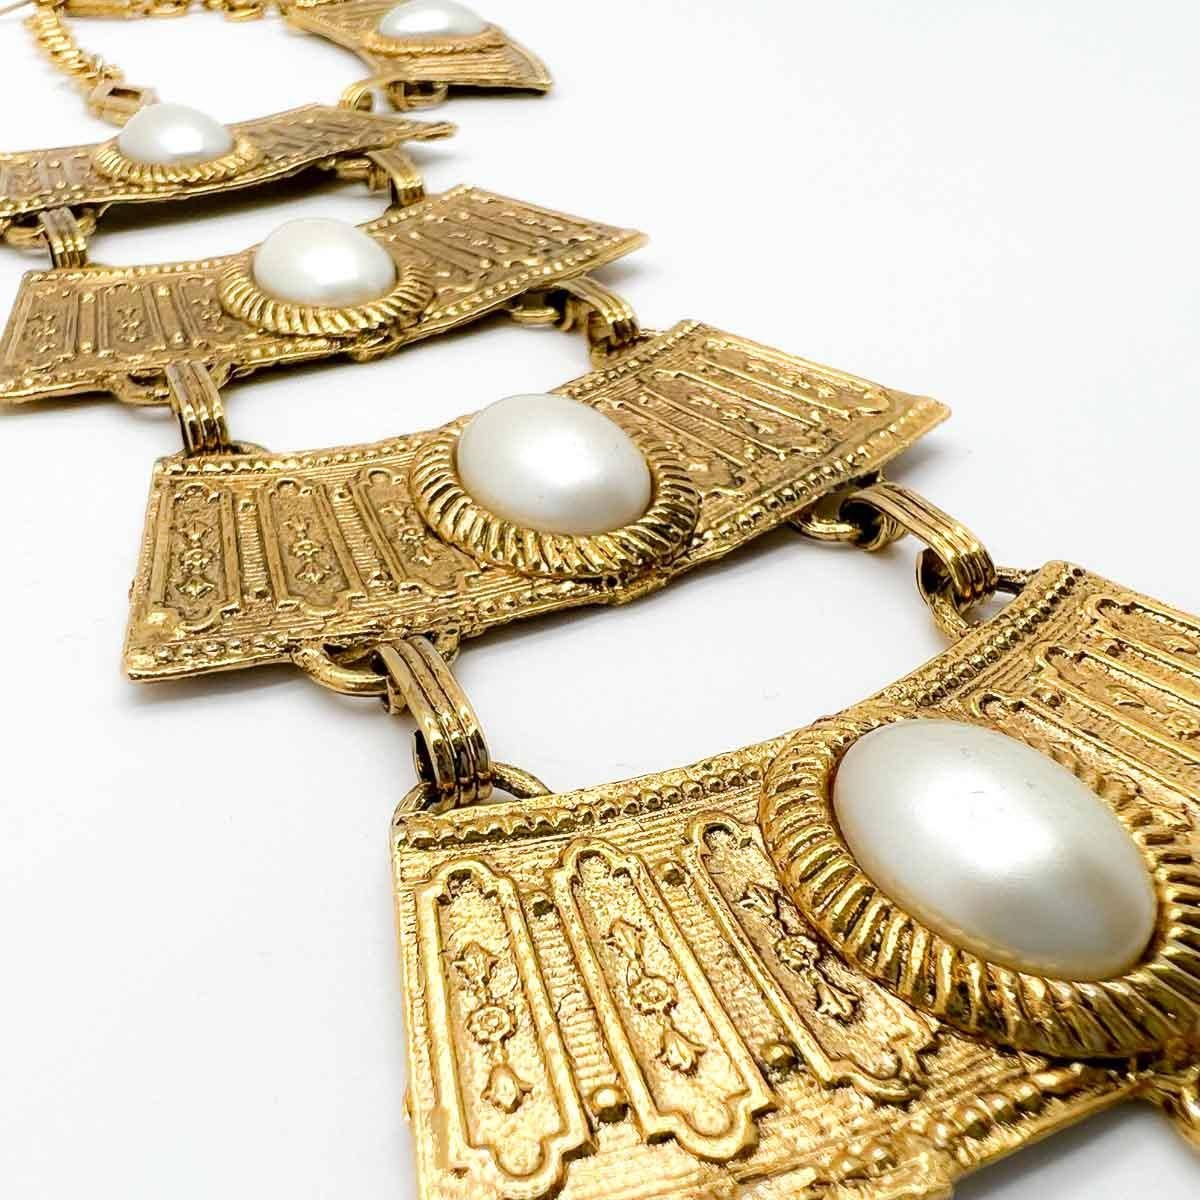 A rare and dramatic vintage Egyptian Grand Bib. Exquisite Egyptian inspired detailing beautifully contrasted by the large oval pearls. Make a statement with this stunning piece of wearable art.
An unsigned beauty. A rare treasure. Just because a